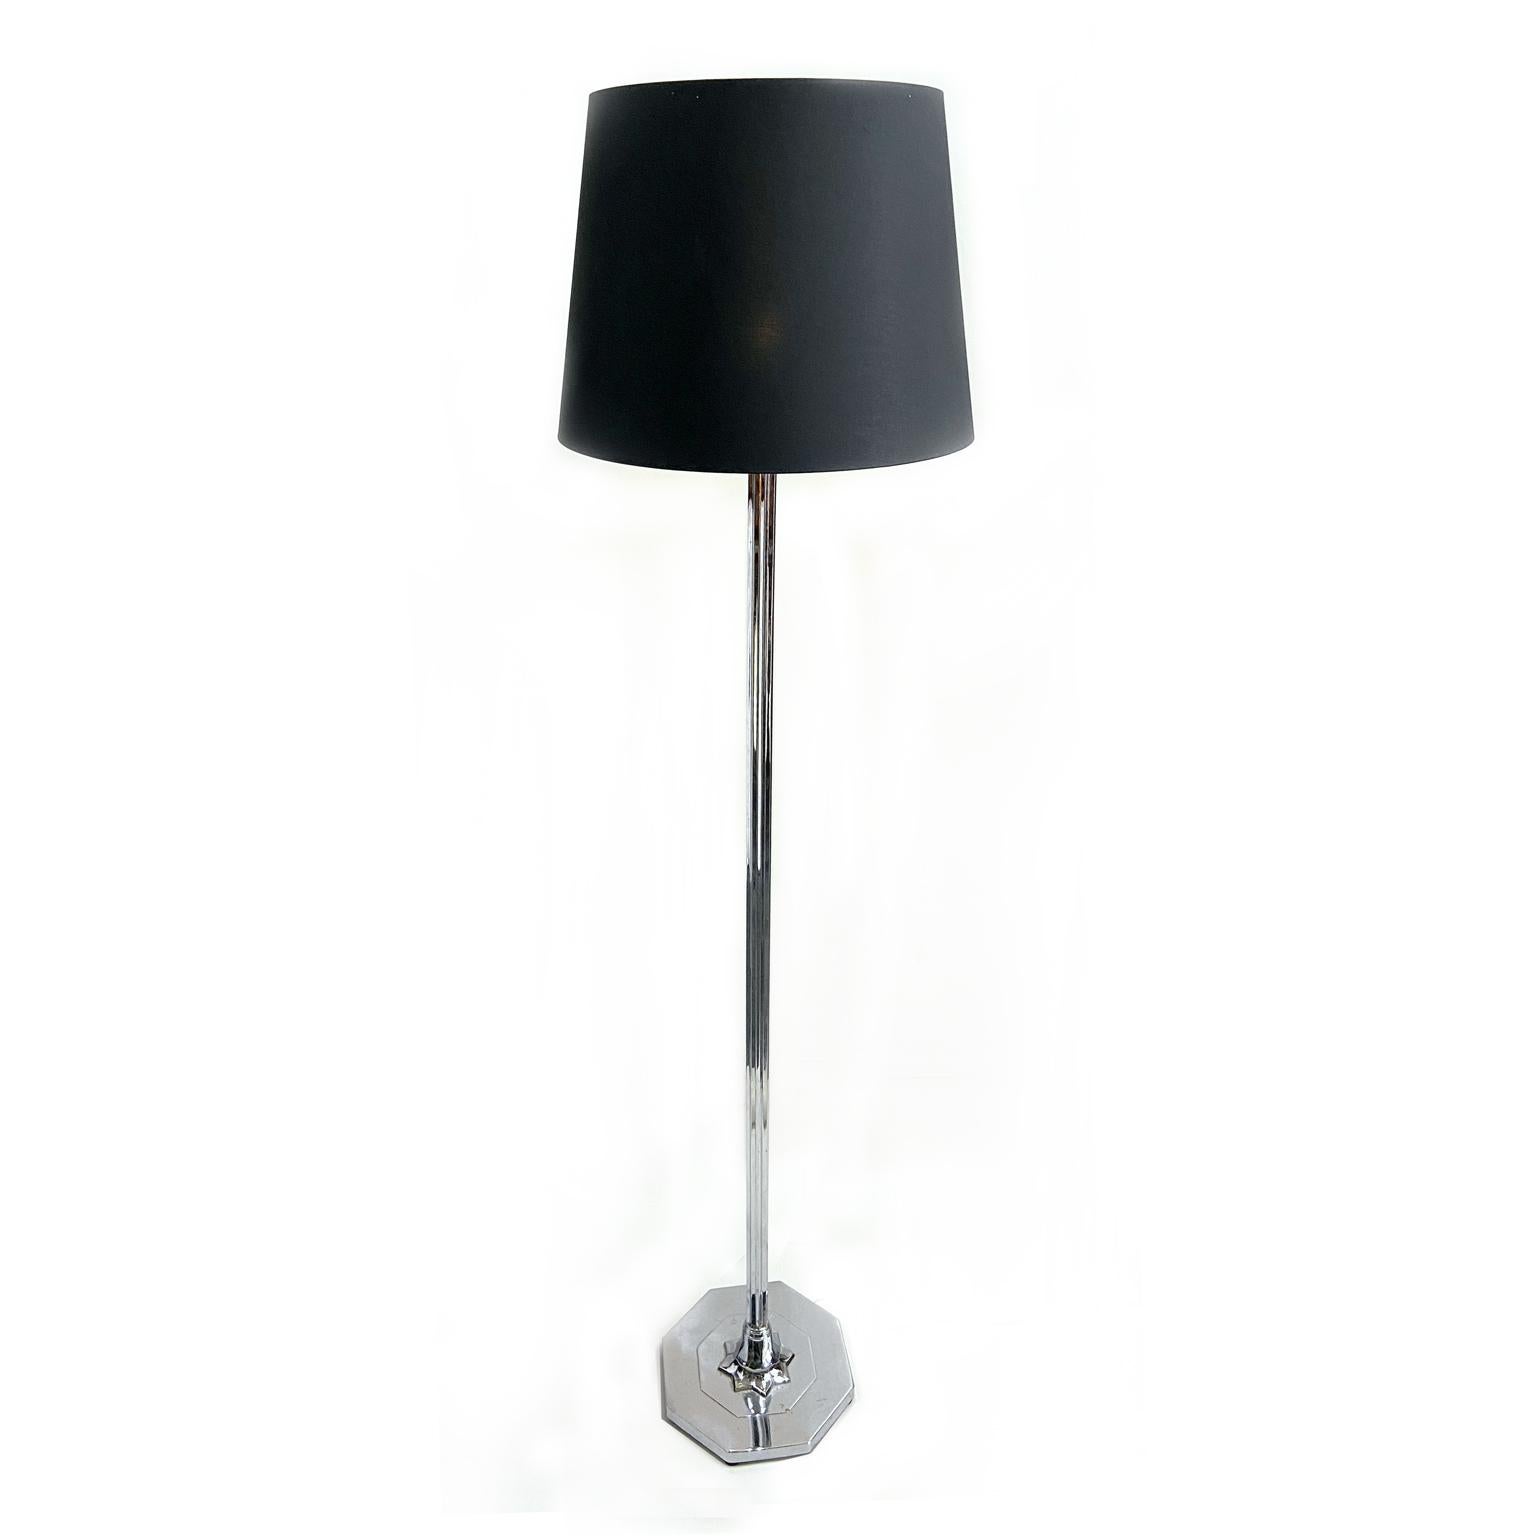 Tall chrome Art Deco floor lamp with octagonal foot displays an eight pointed star shape center and has a ribbed stem.

The black tapered shade is not included. It measured 40 cm Height and 50 cm diameter at the bottom.